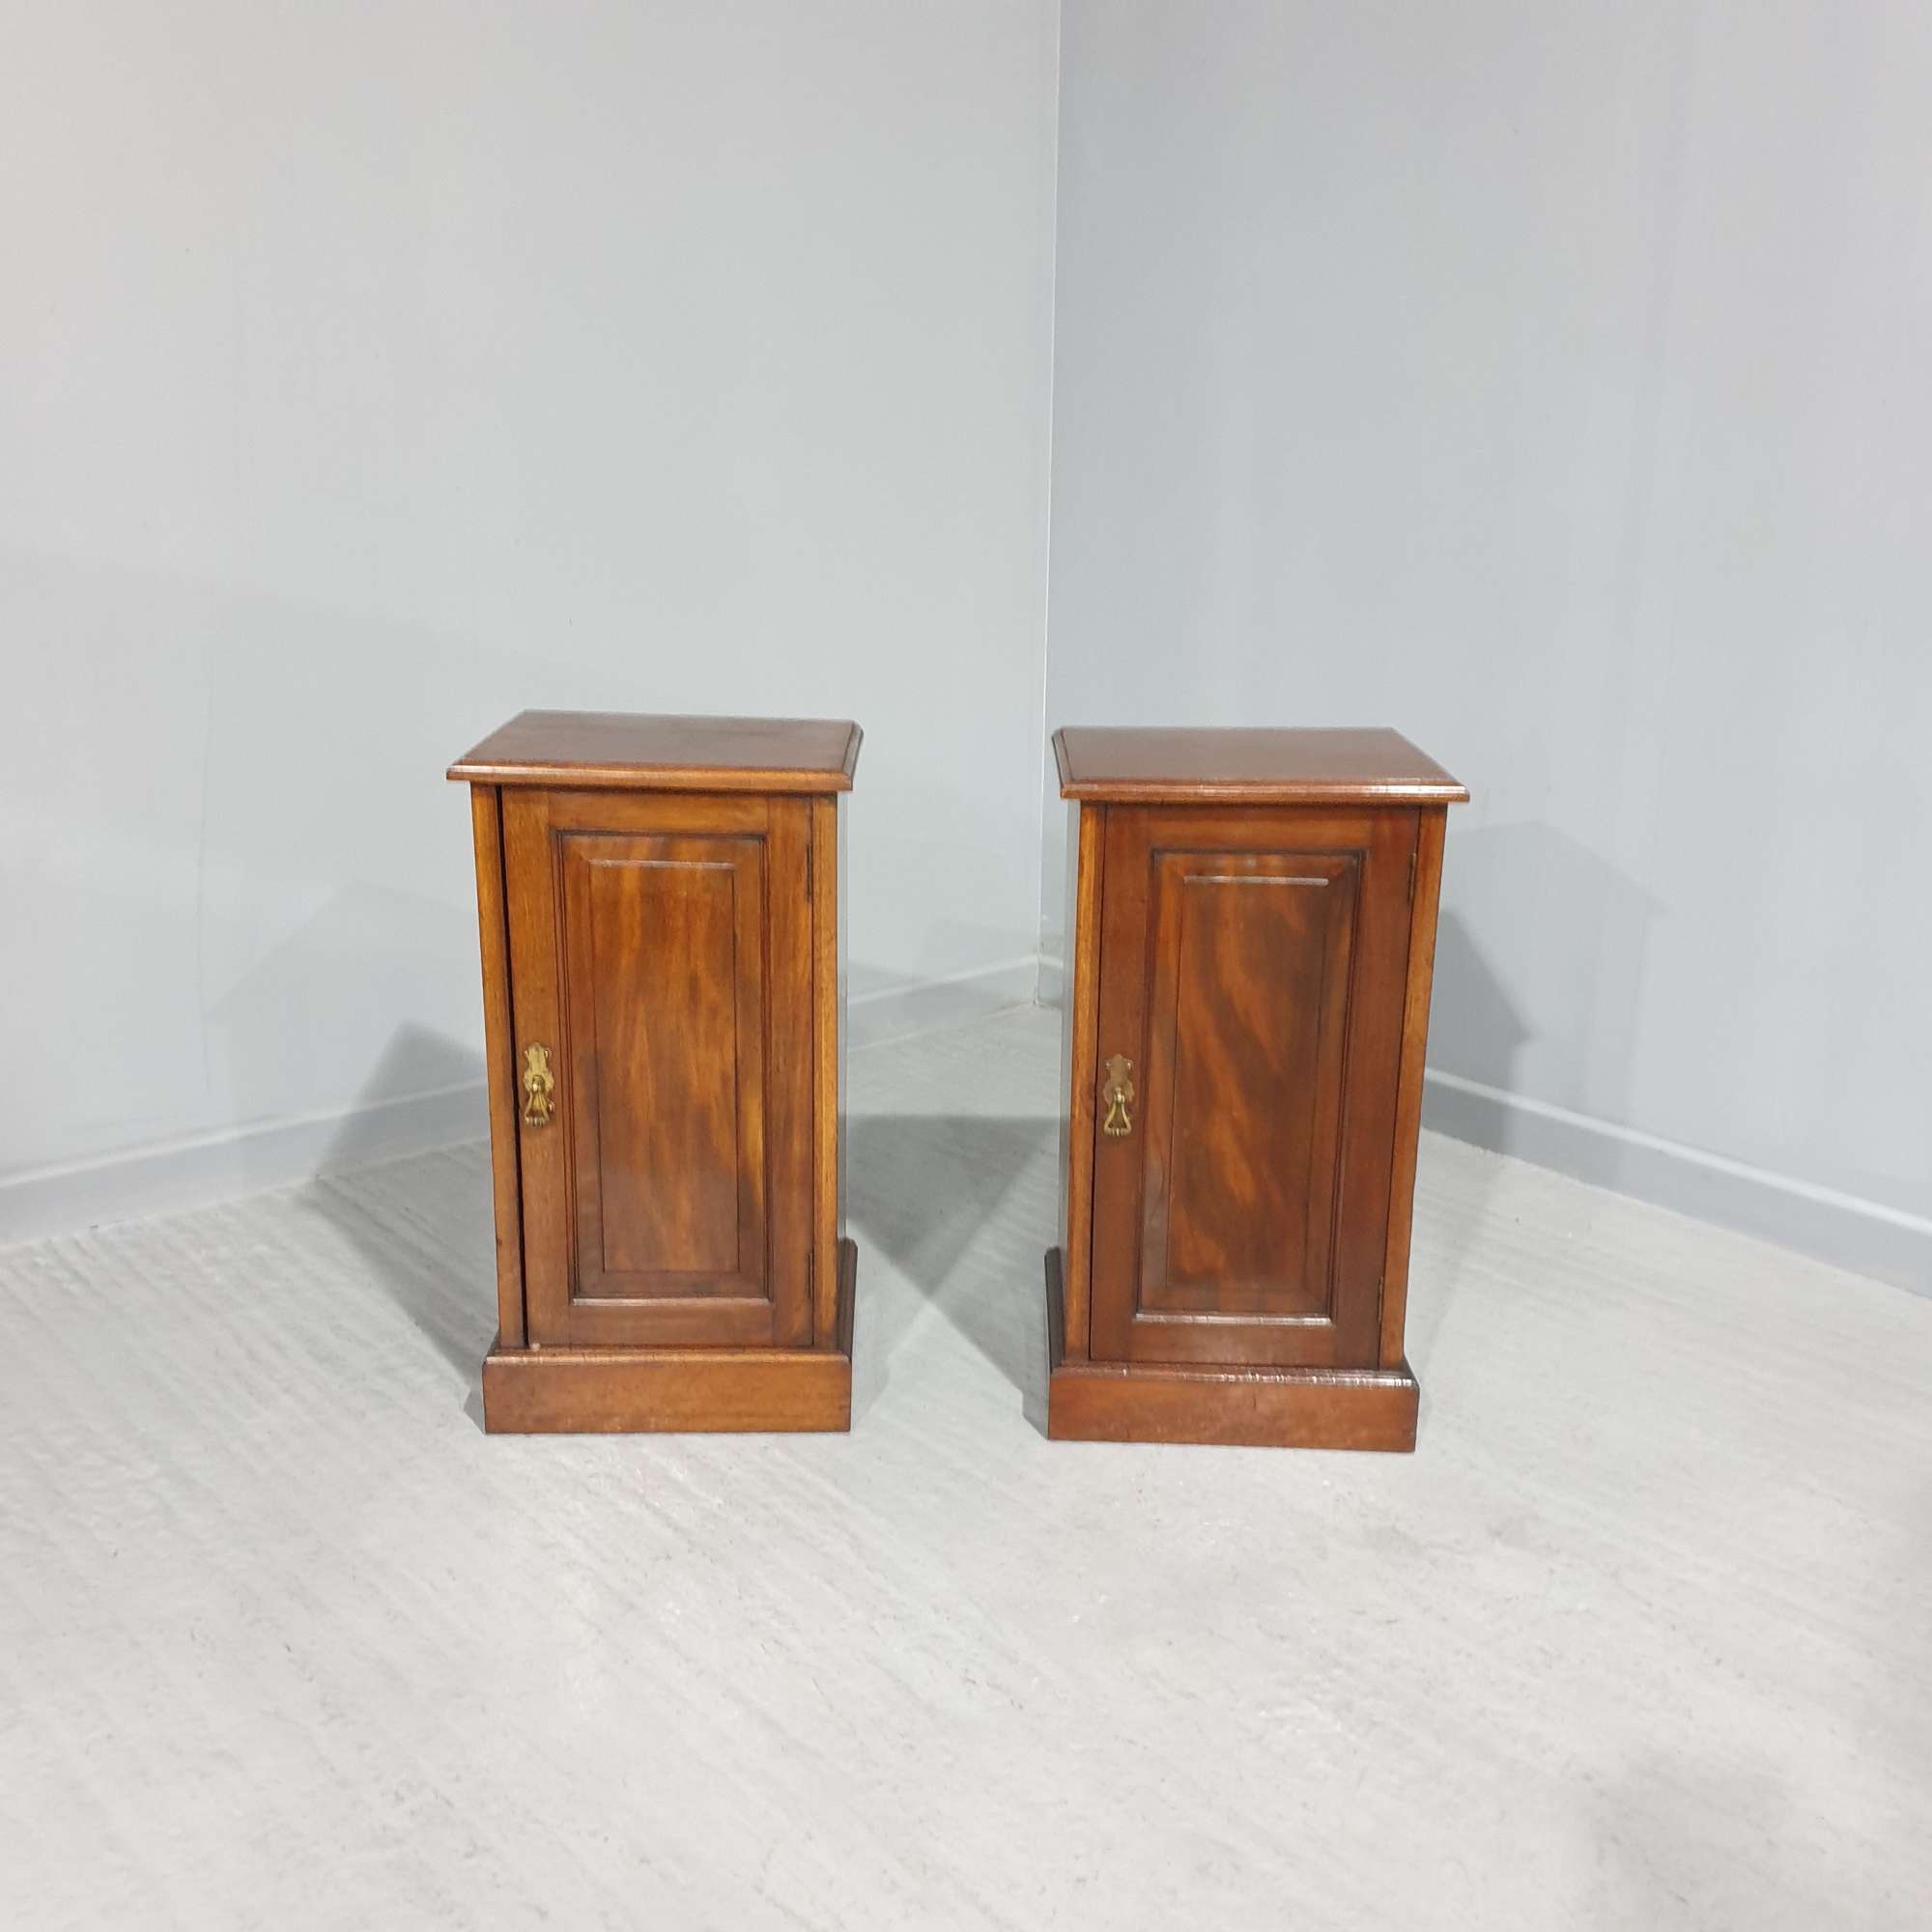 Pair Victorian Mahogany Antique Bedside Cabinets